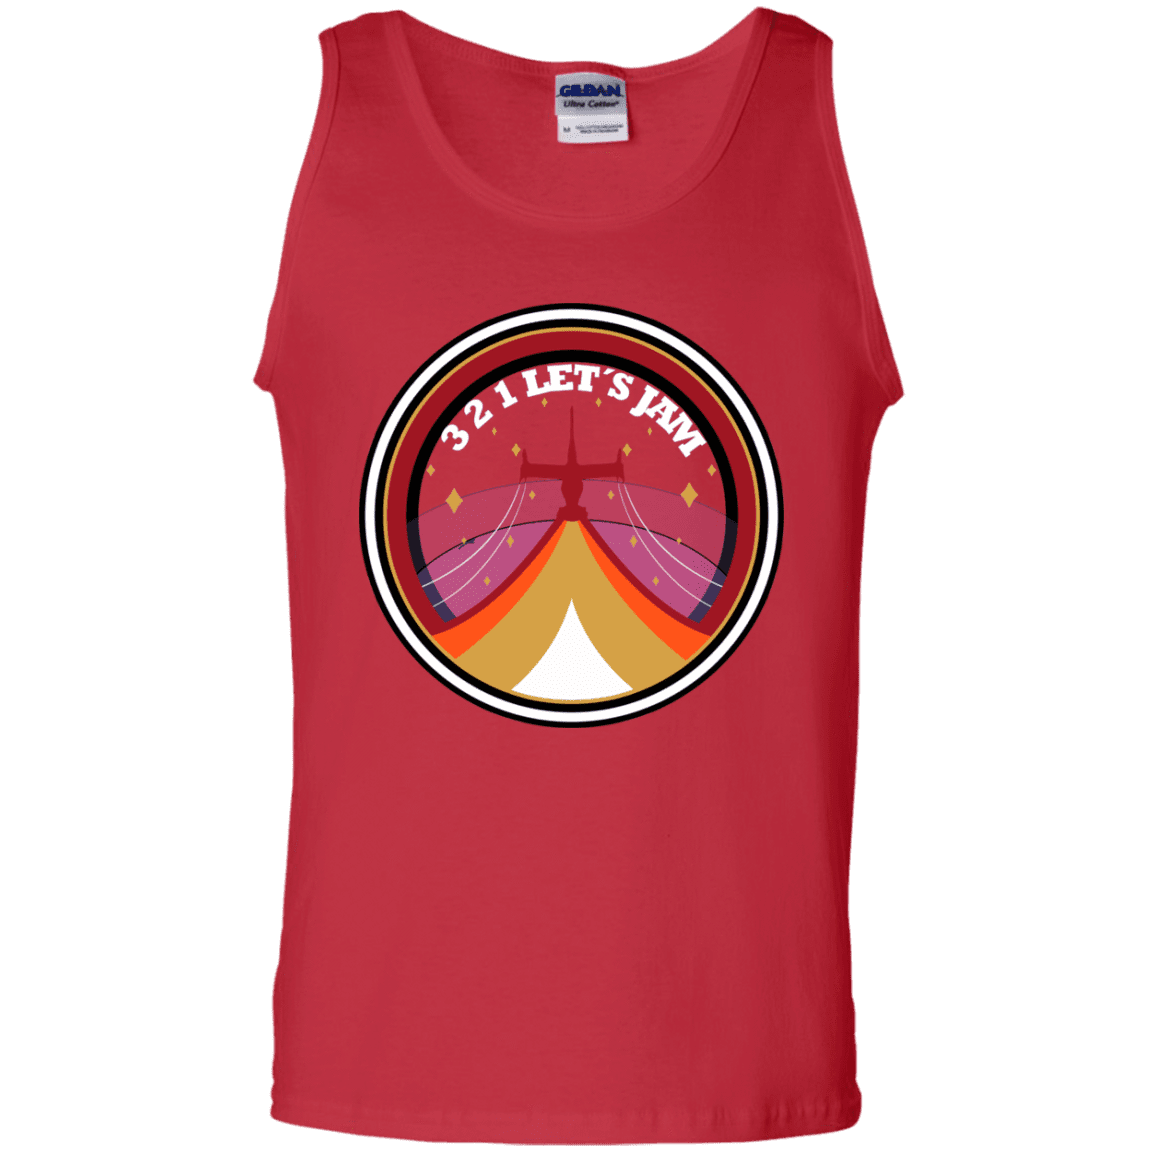 T-Shirts Red / S 3 2 1 Lets Jam Men's Tank Top